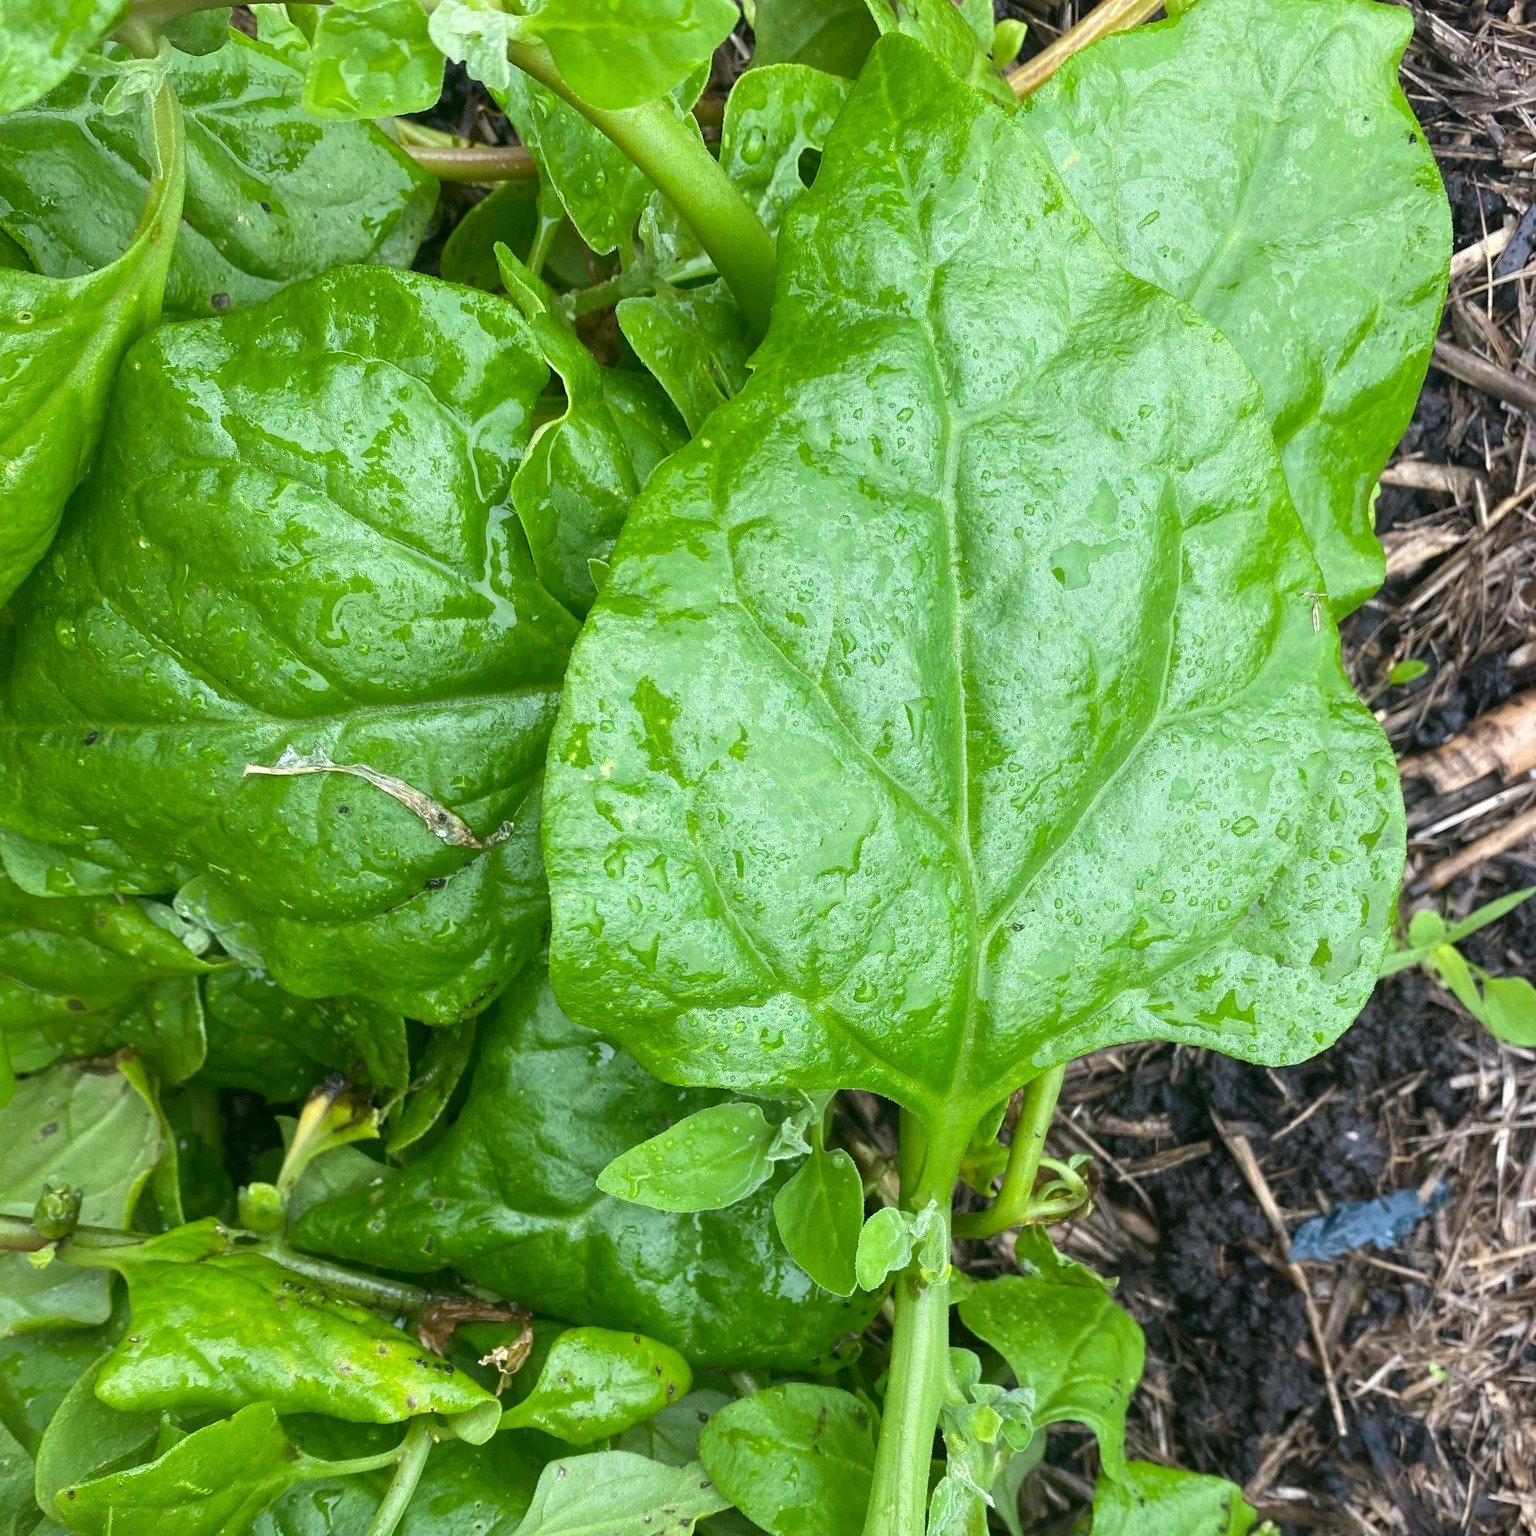 Lots of warrigal greens in the garden at the moment. They're a good spinach substitute - just be sure to cook them before eating. Here are some recipes: https://www.notquitenigella.com/2018/05/17/warrigal-greens-recipes/